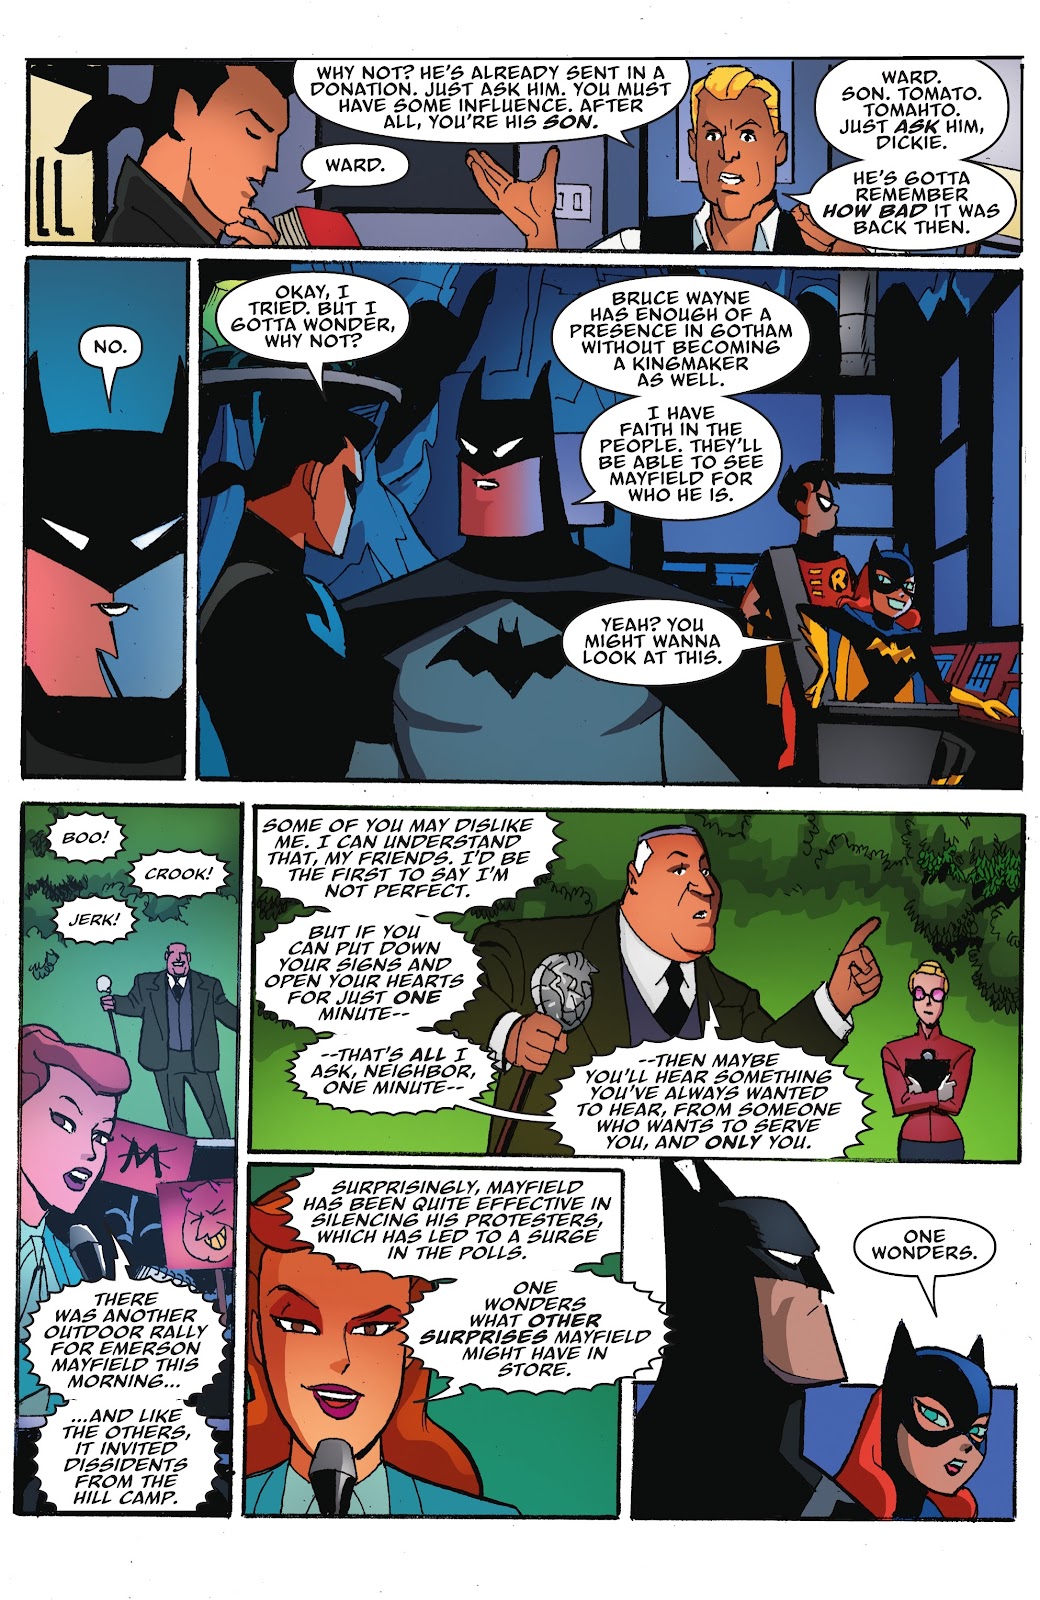 Batman: The Adventures Continue: Season Two issue 6 - Page 5